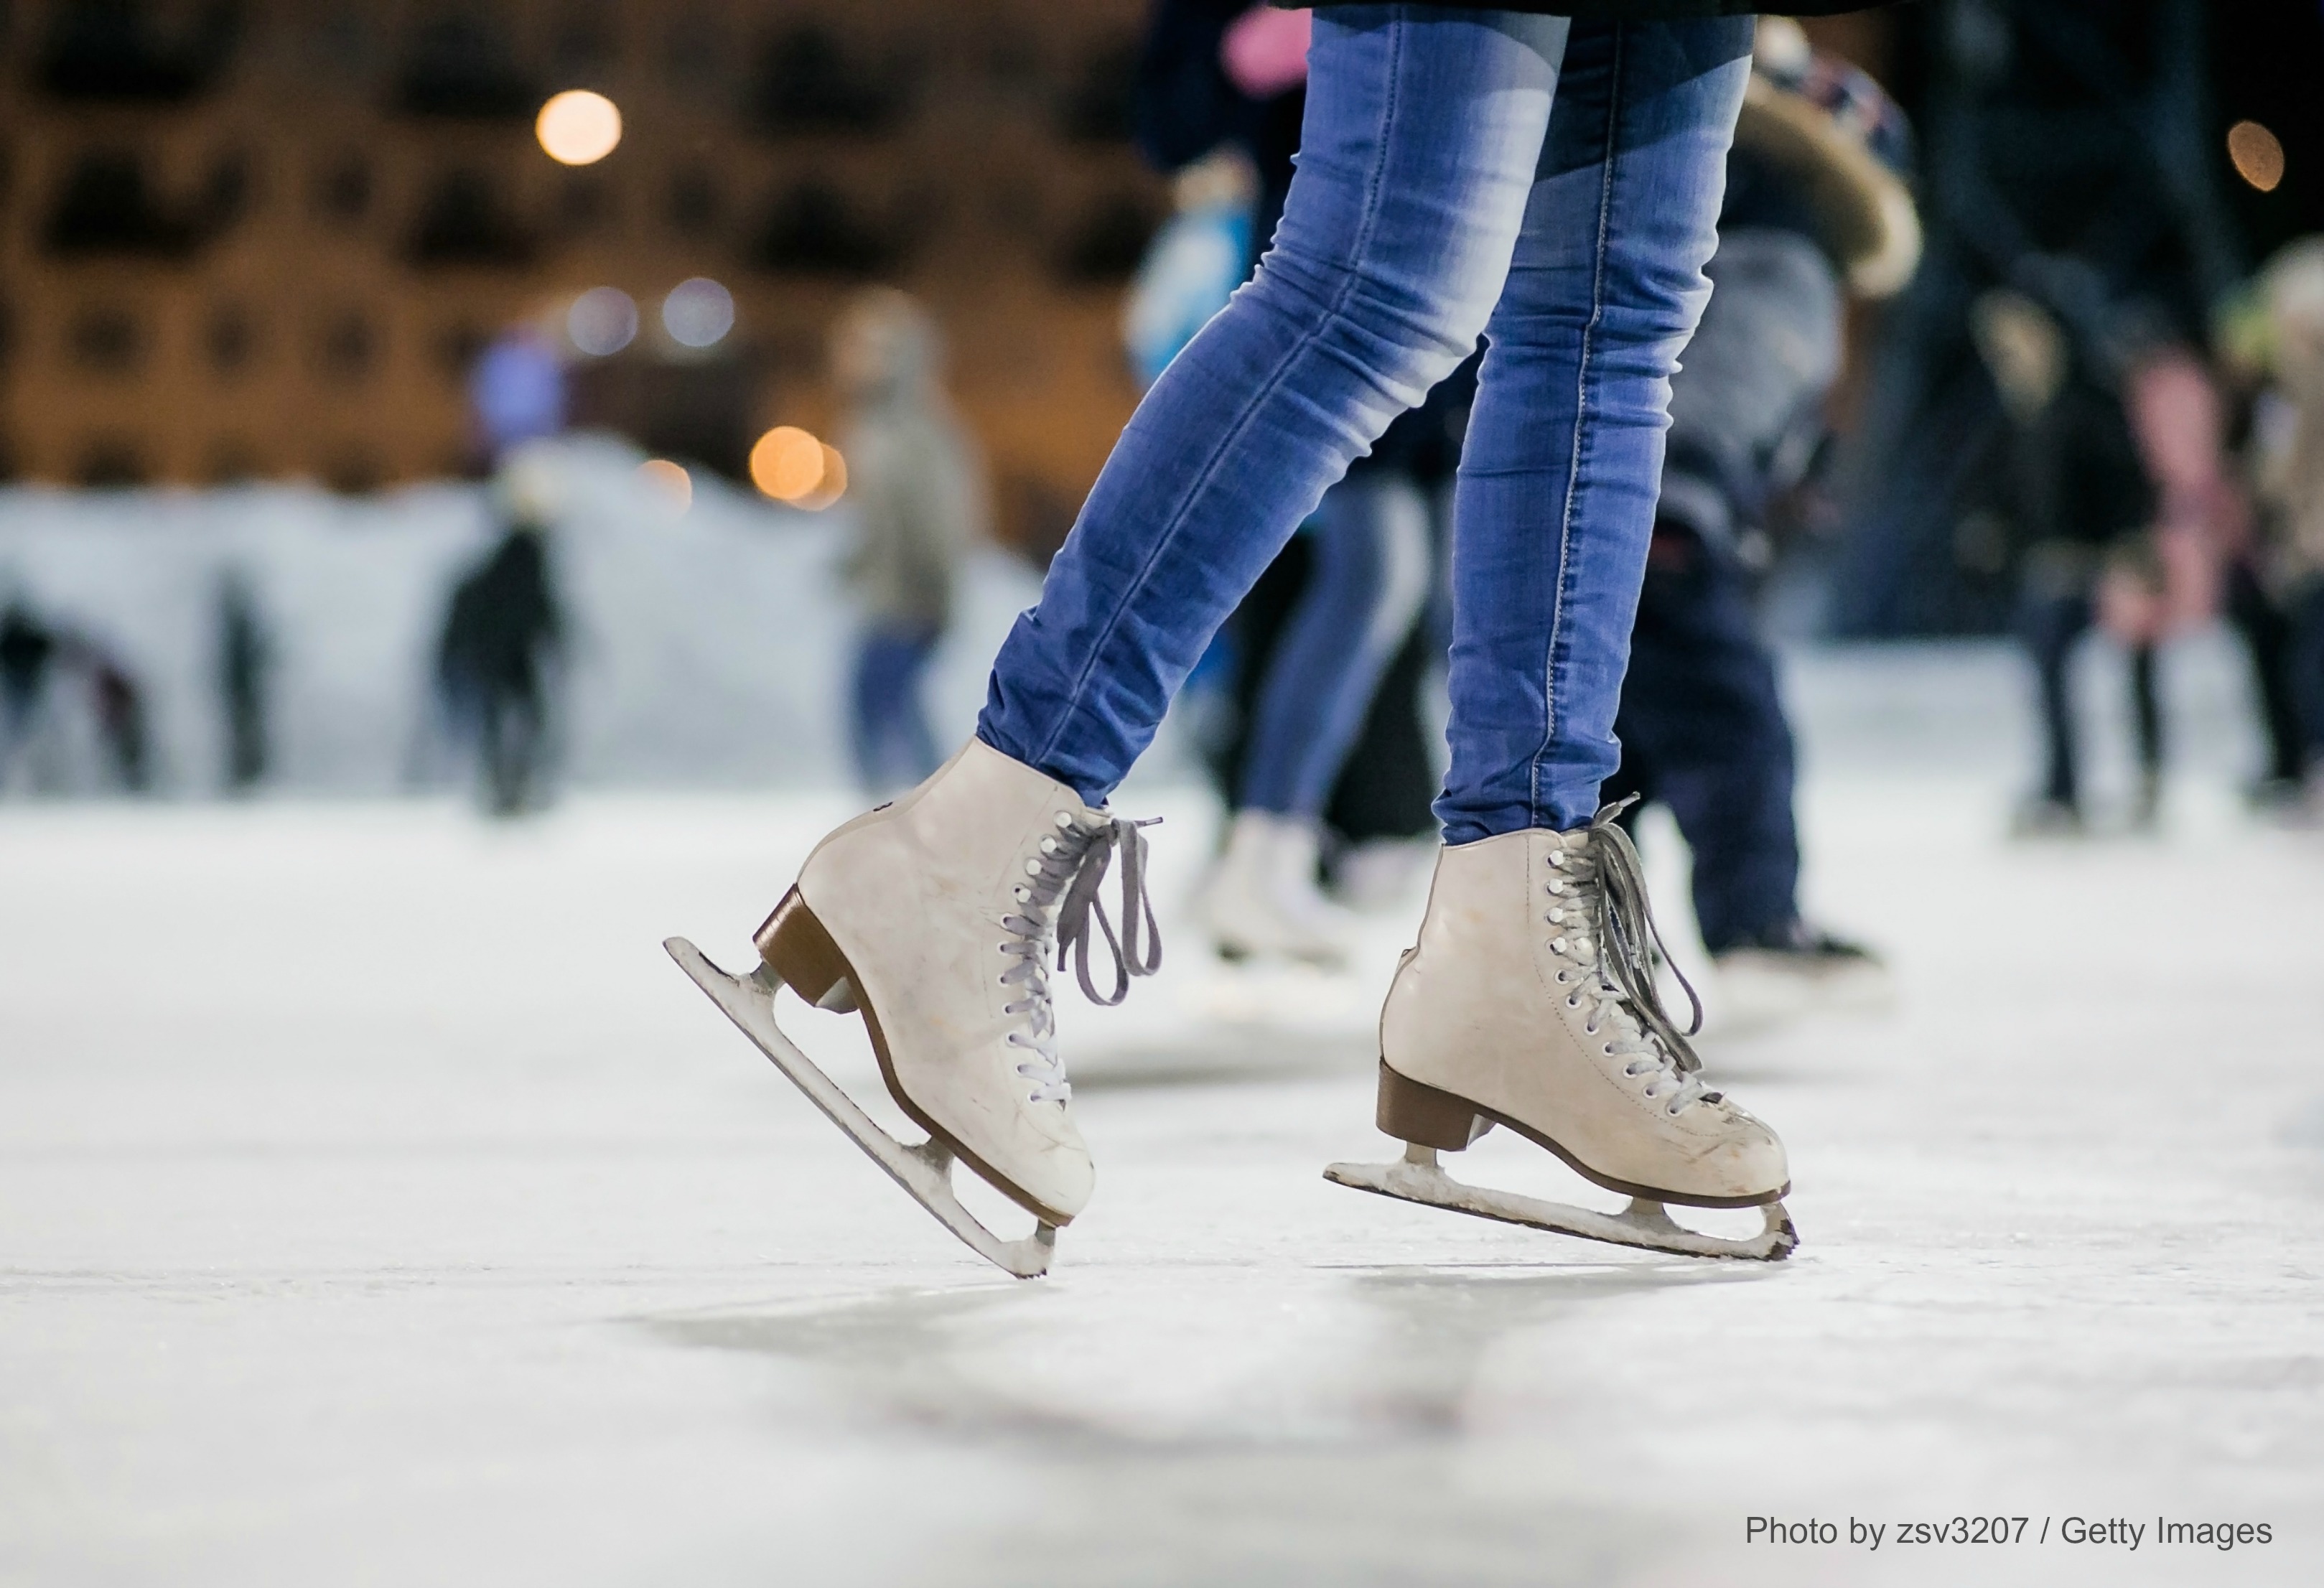 Enjoy a Day of Fun Ice Skating in CT | Stonecroft Country Inn